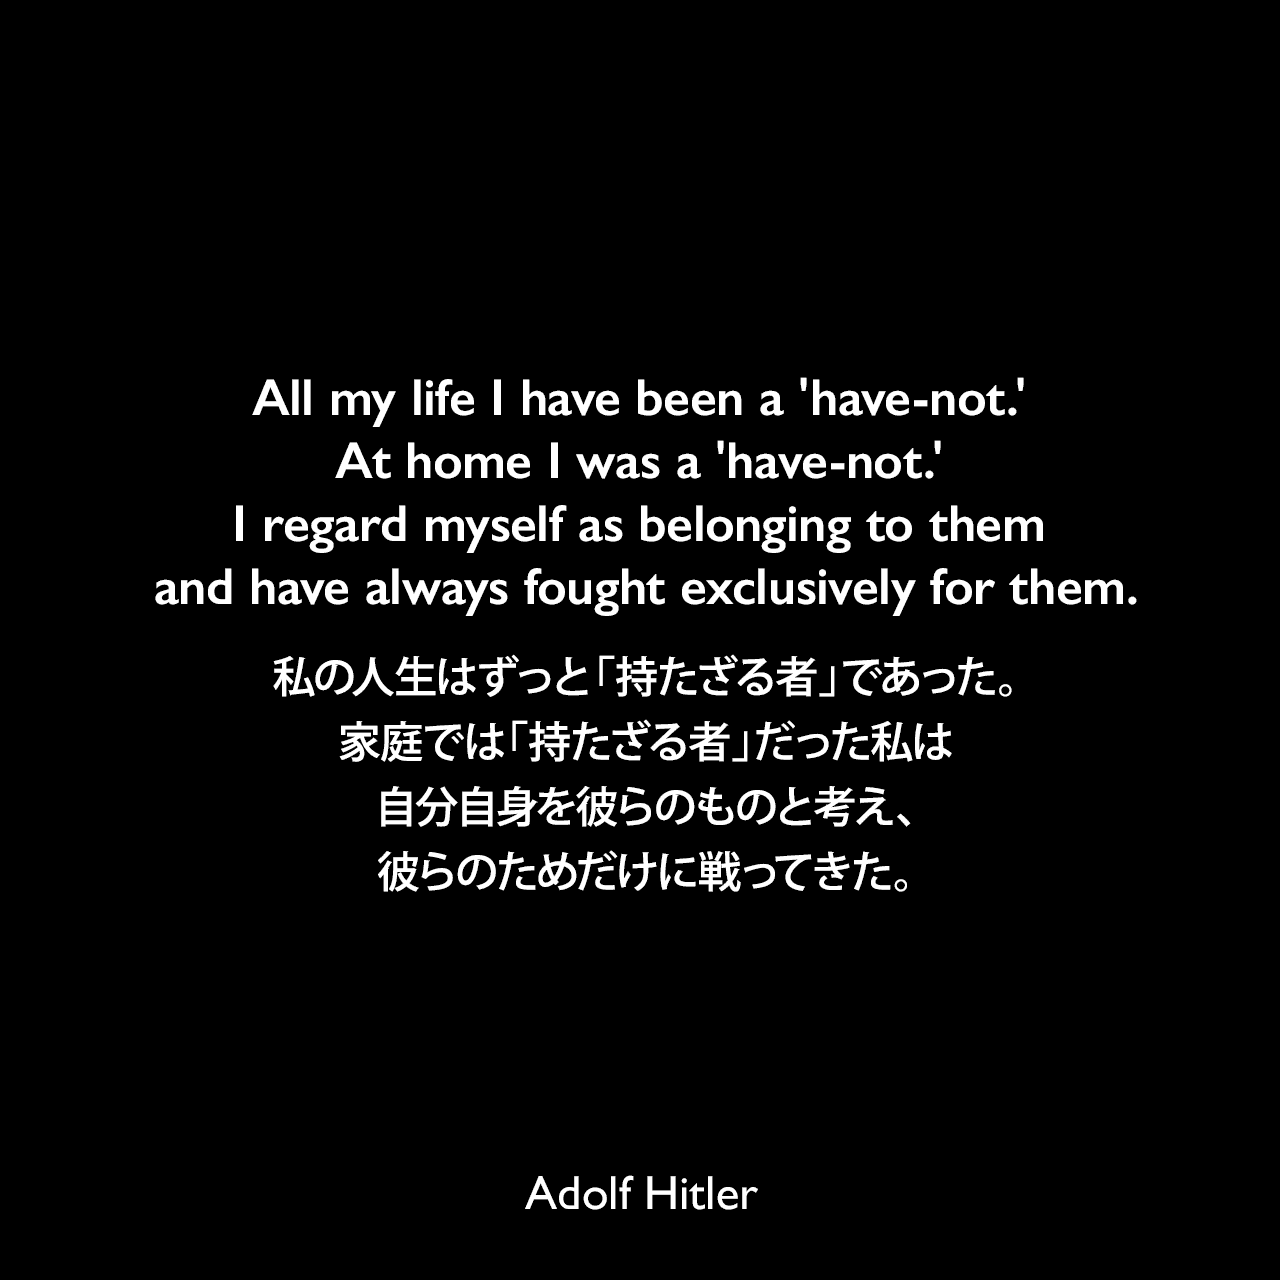 All my life I have been a 'have-not.' At home I was a 'have-not.' I regard myself as belonging to them and have always fought exclusively for them.私の人生はずっと「持たざる者」であった。家庭では「持たざる者」だった私は自分自身を彼らのものと考え、彼らのためだけに戦ってきた。- 1940年12月10日ベルリンの労働者へのスピーチよりAdolf Hitler